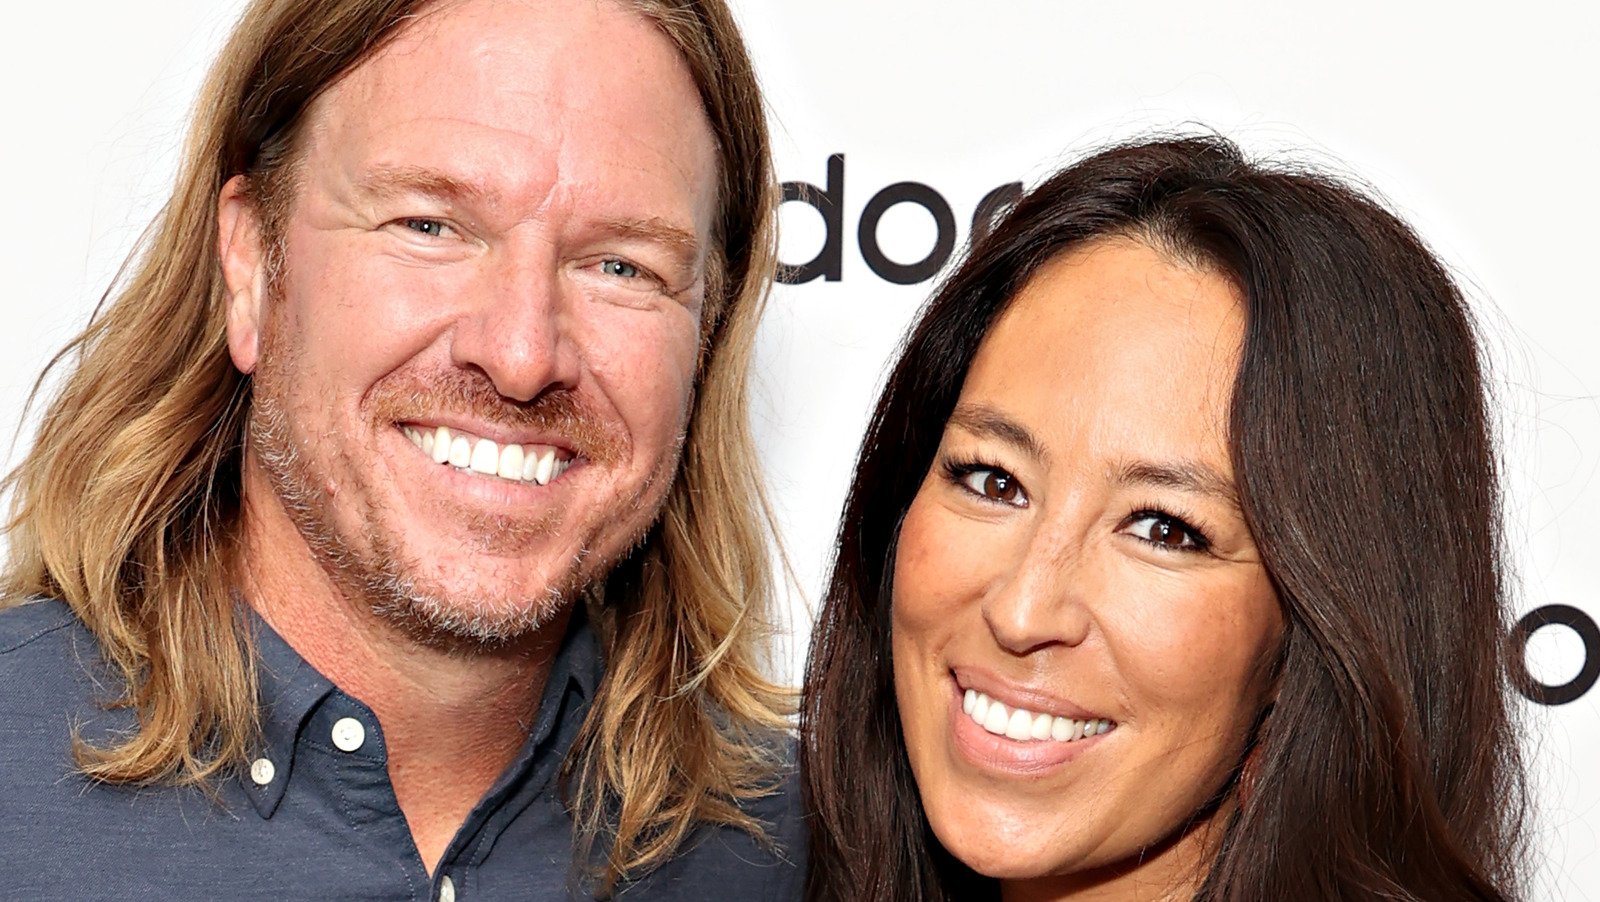 Inside Joanna Gaines' Relationship With Chip Gaines